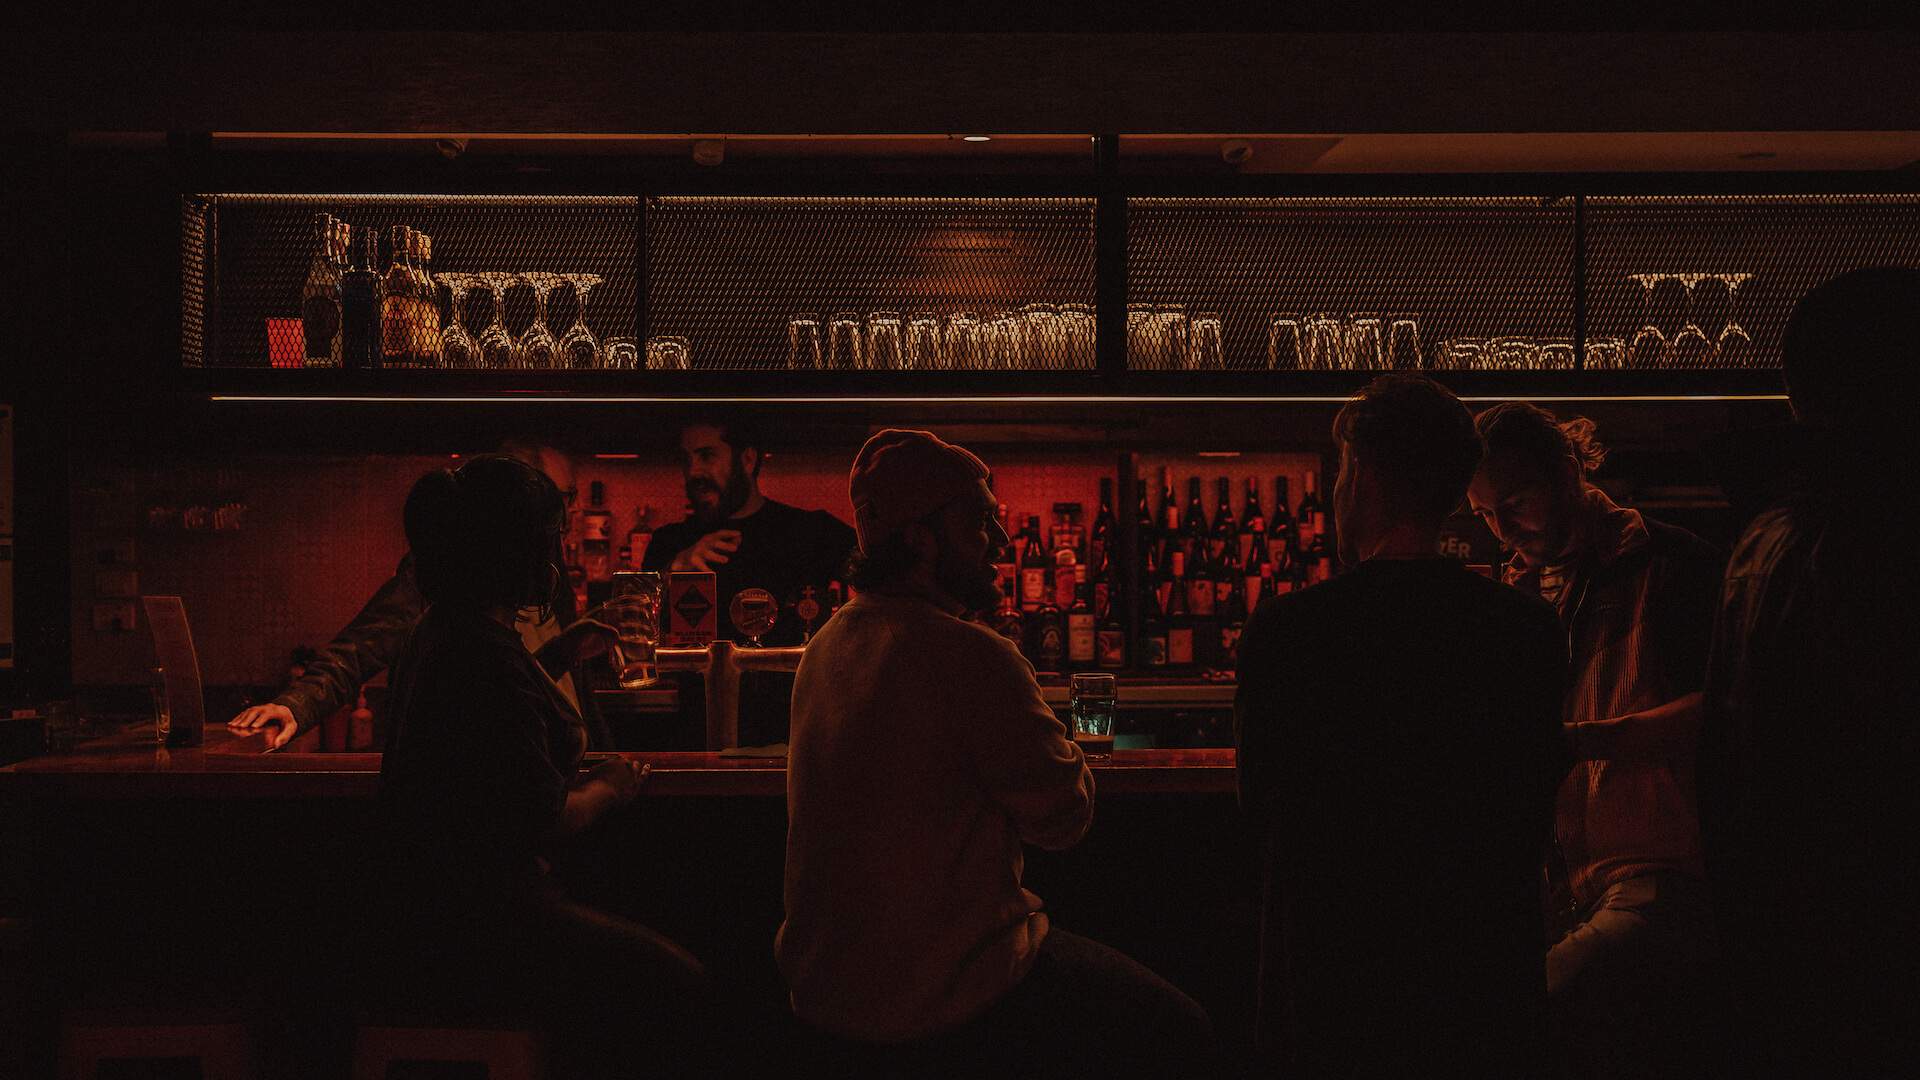 Now Open: Melbourne Just Scored a New Underground Live Music Venue and Bar in the CBD